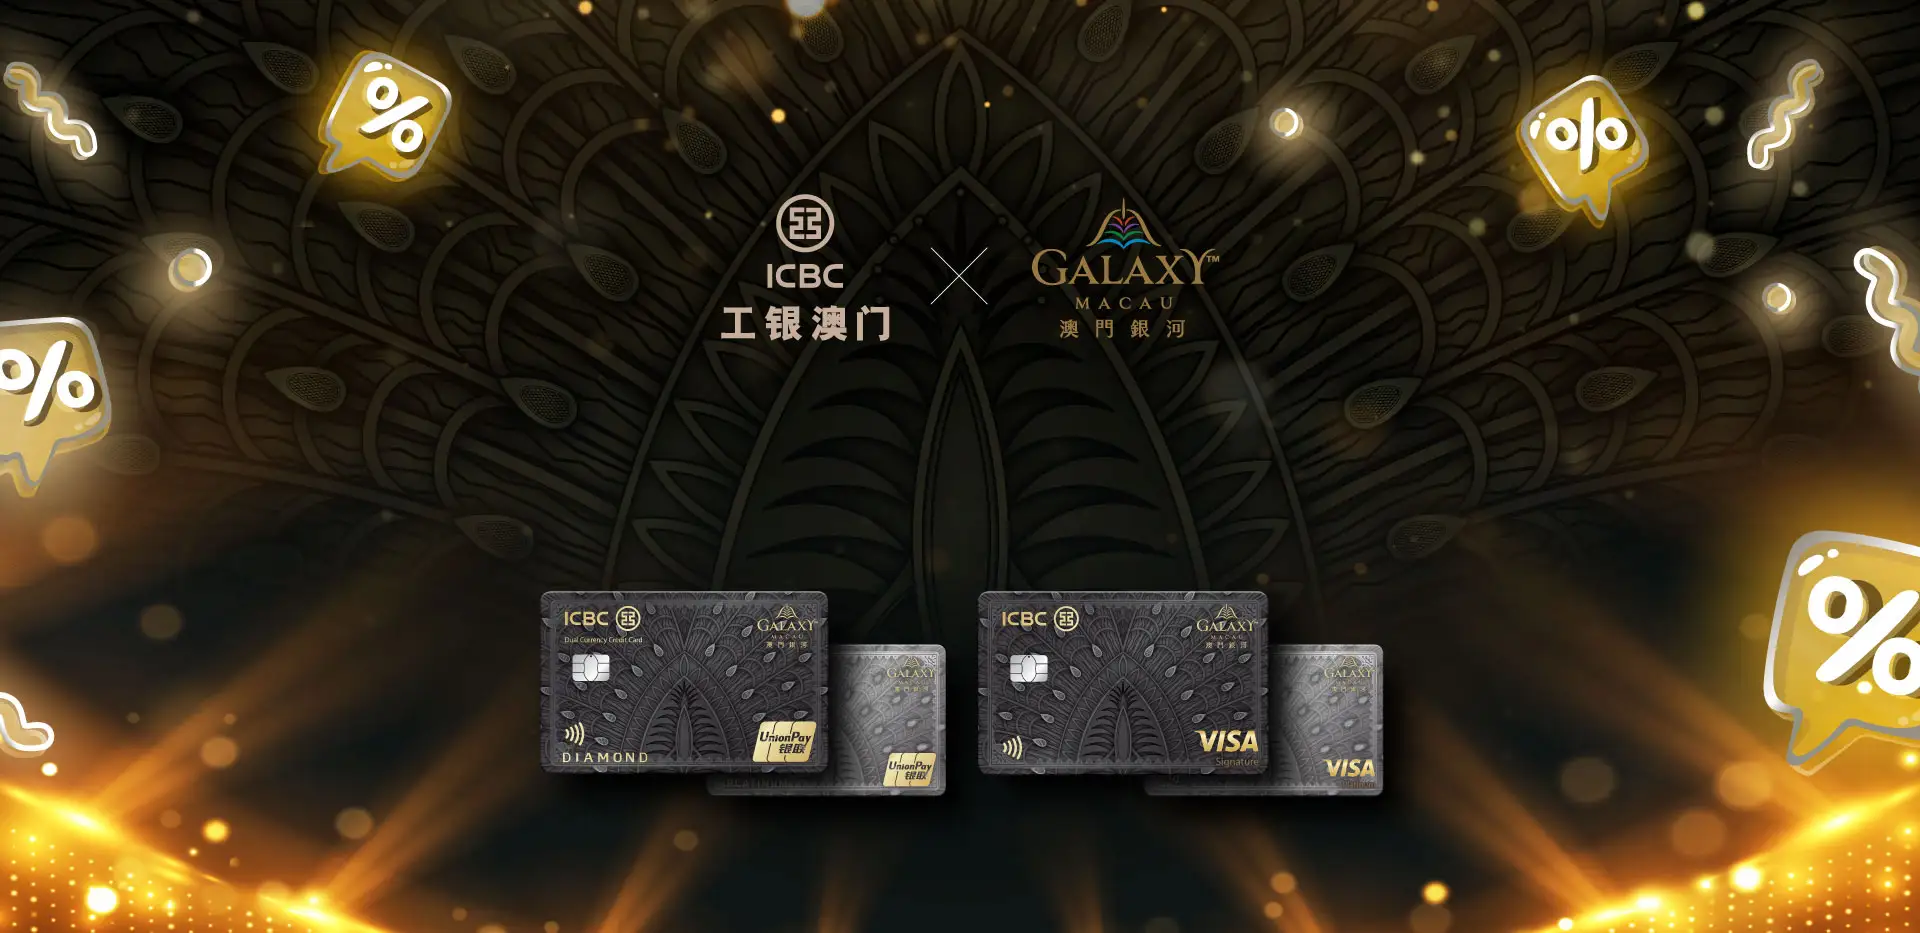 Exclusive Monthly Privileges【ICBC Galaxy Macau Credit Card】